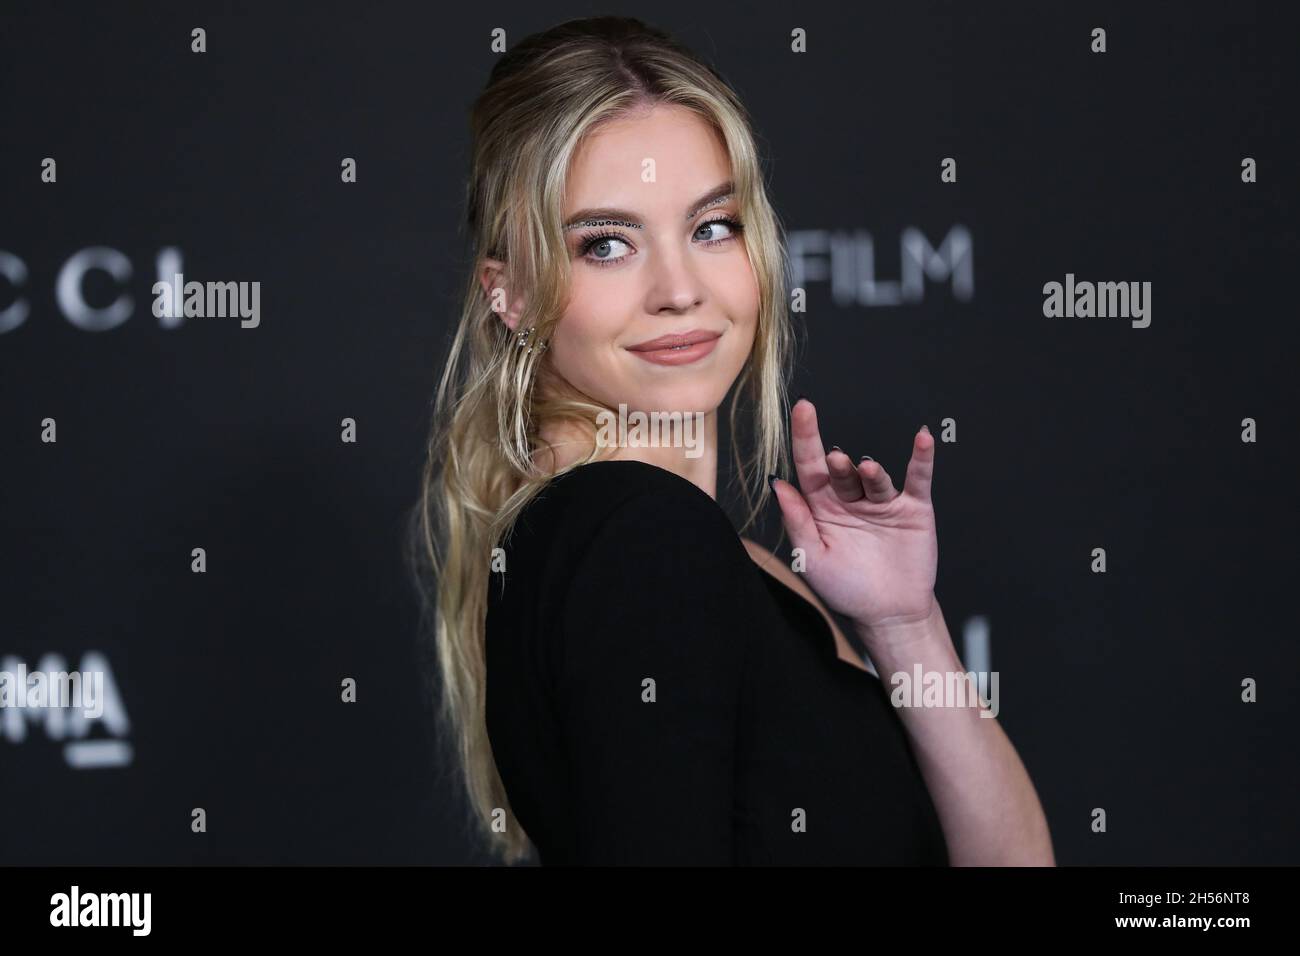 LOS ANGELES, CALIFORNIA, USA - NOVEMBER 06: Sydney Sweeney wearing a Saint Laurent dress arrives at the 10th Annual LACMA Art + Film Gala 2021 held at the Los Angeles County Museum of Art on November 6, 2021 in Los Angeles, California, United States. (Photo by Xavier Collin/Image Press Agency) Stock Photo